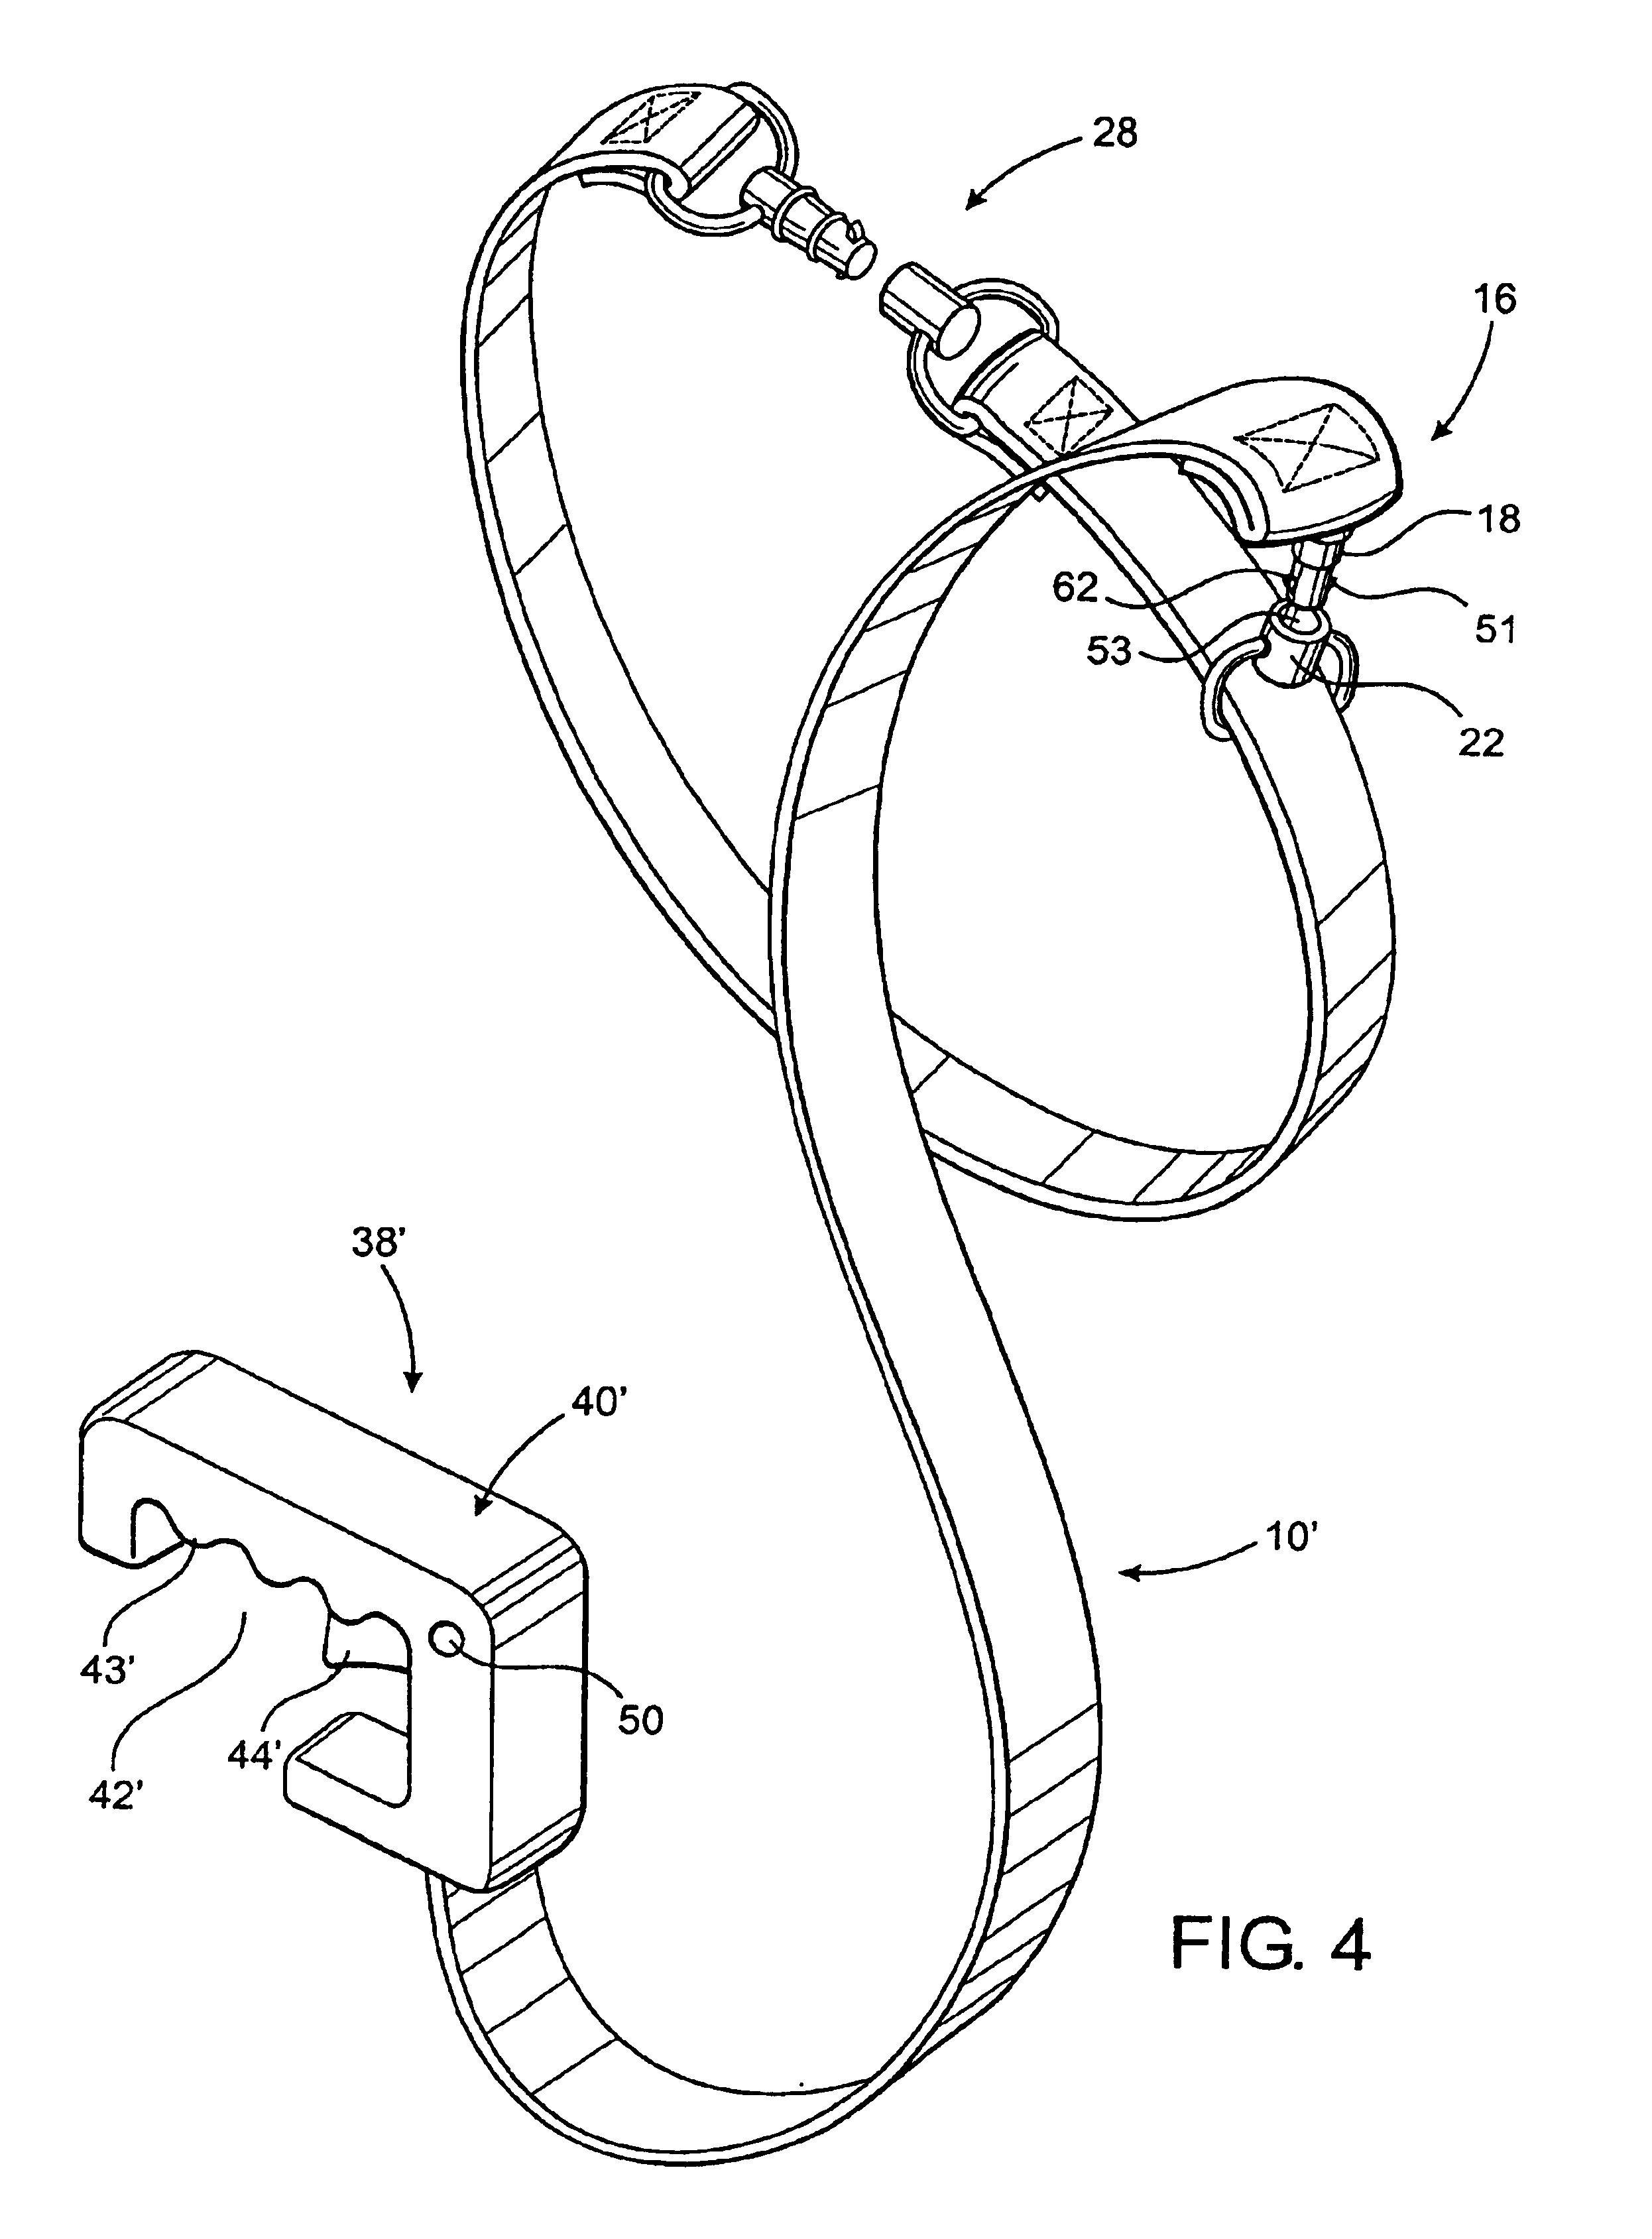 Retractable leash assembly with a quick connect coupling assembly